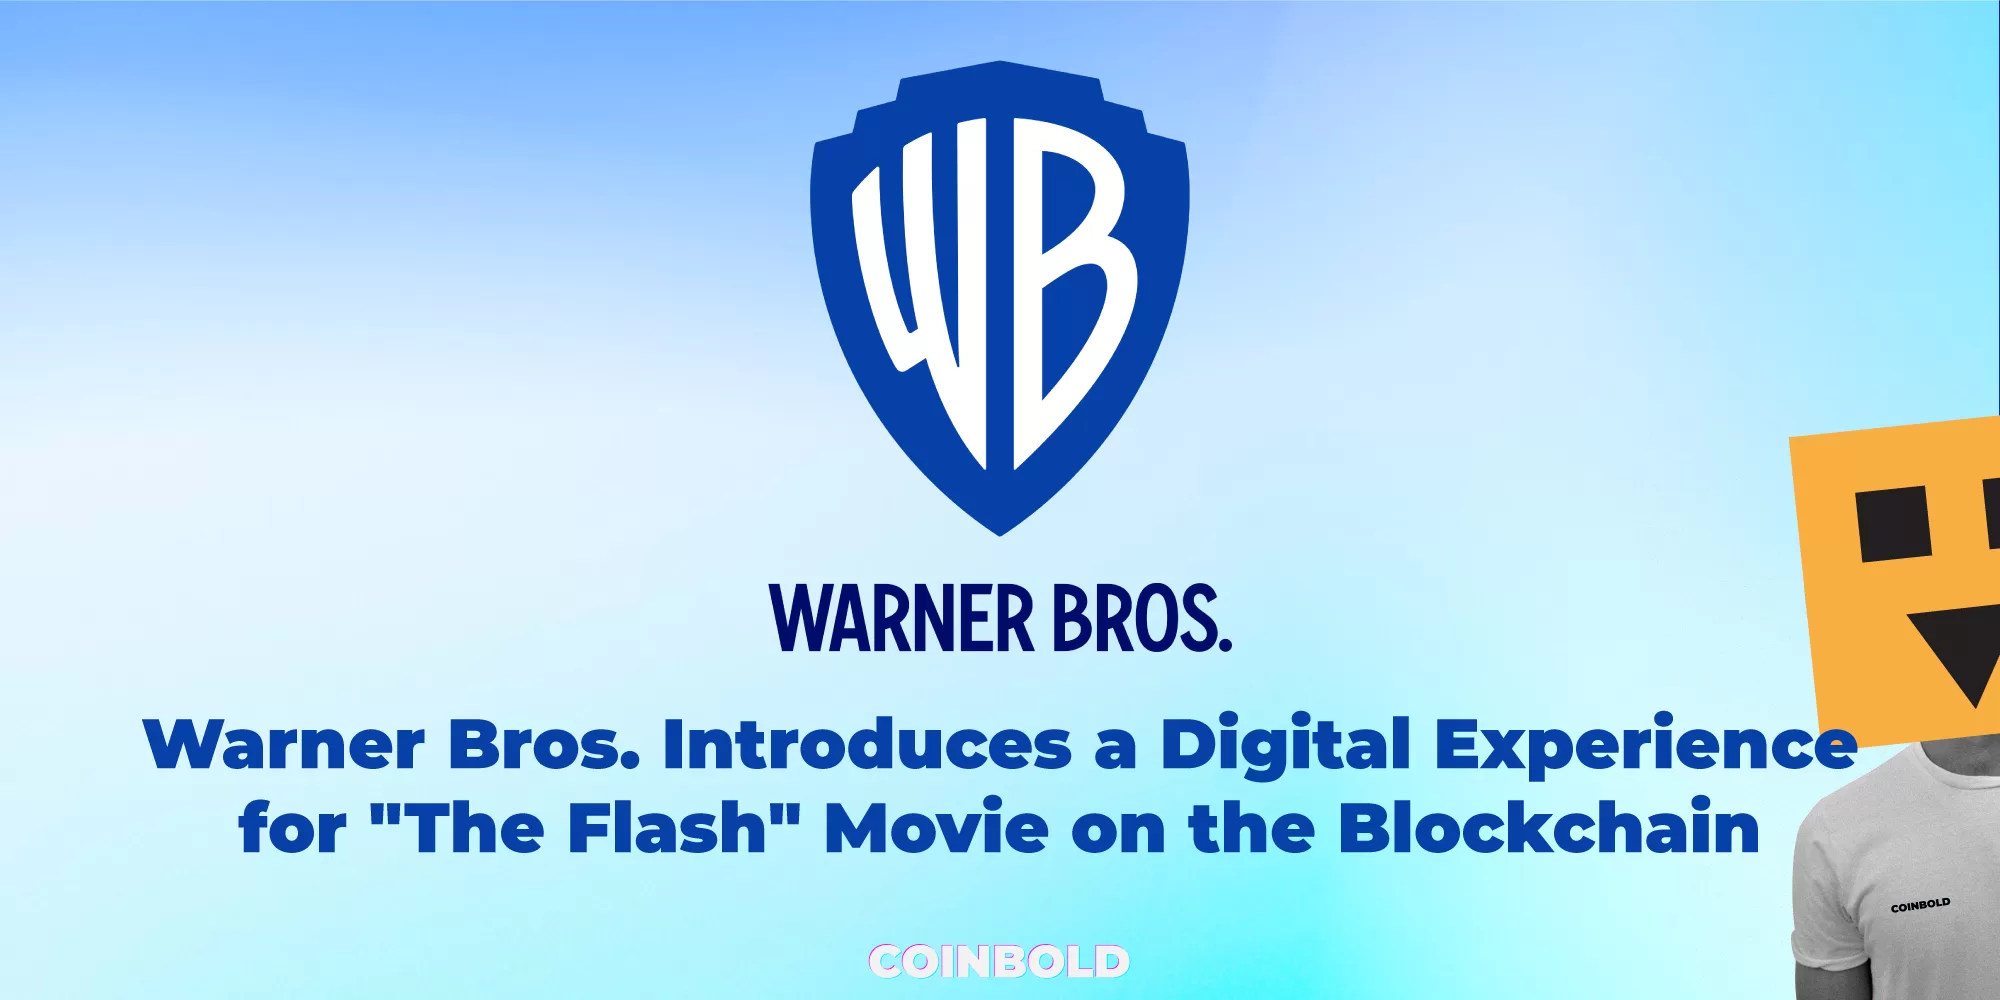 Warner Bros. Introduces a Digital Experience for "The Flash" Movie on the Blockchain